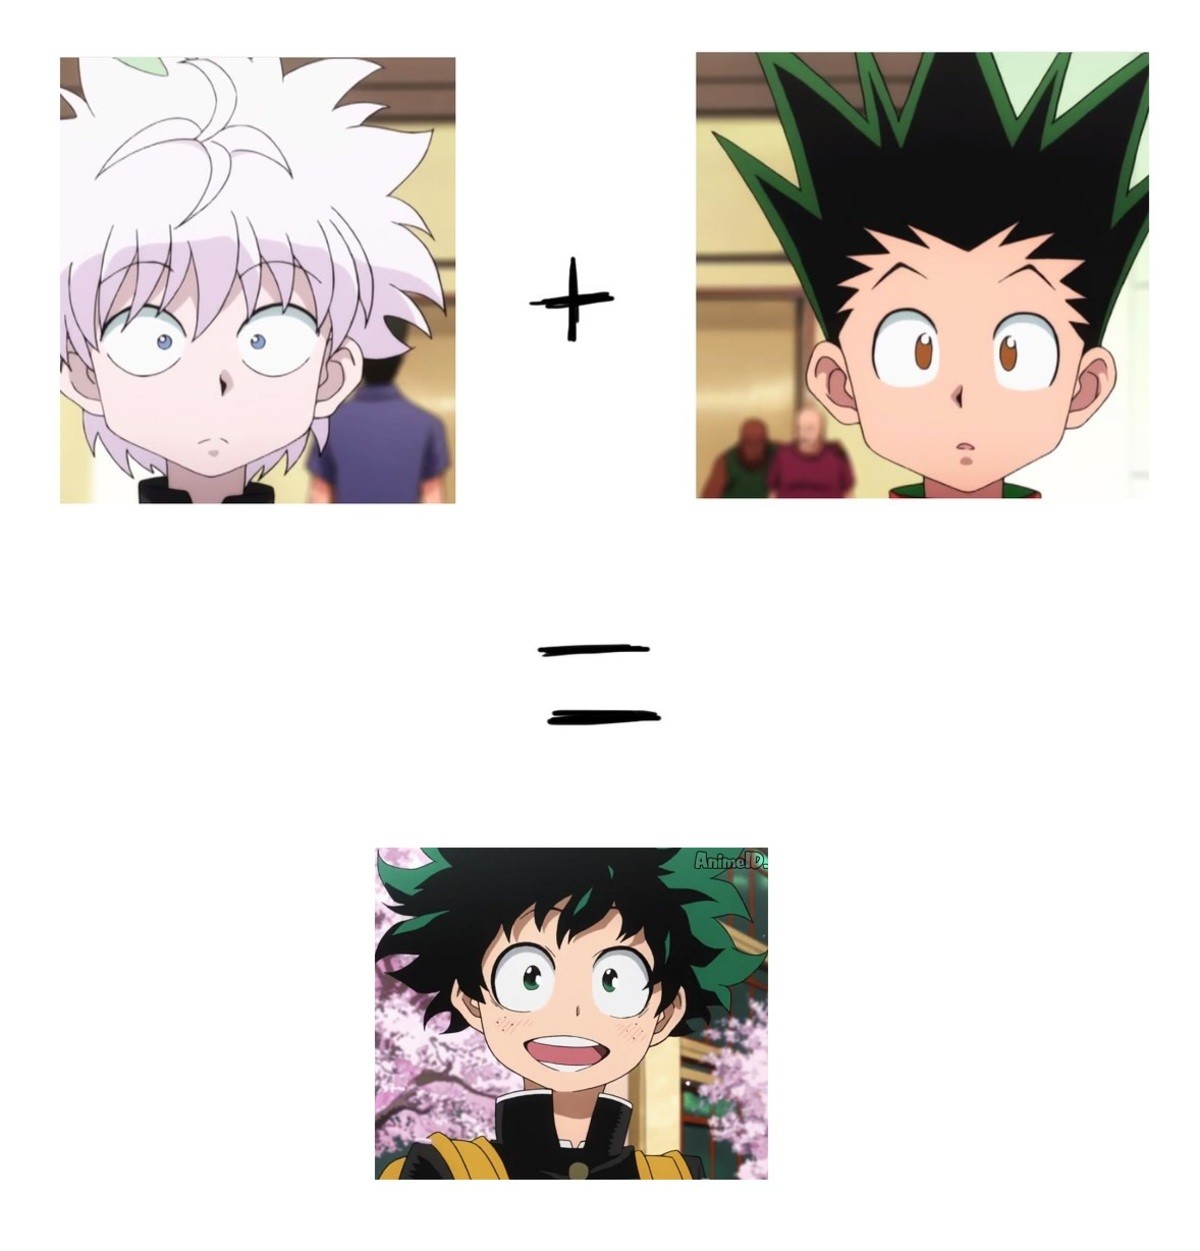 cursed images Bnha edition